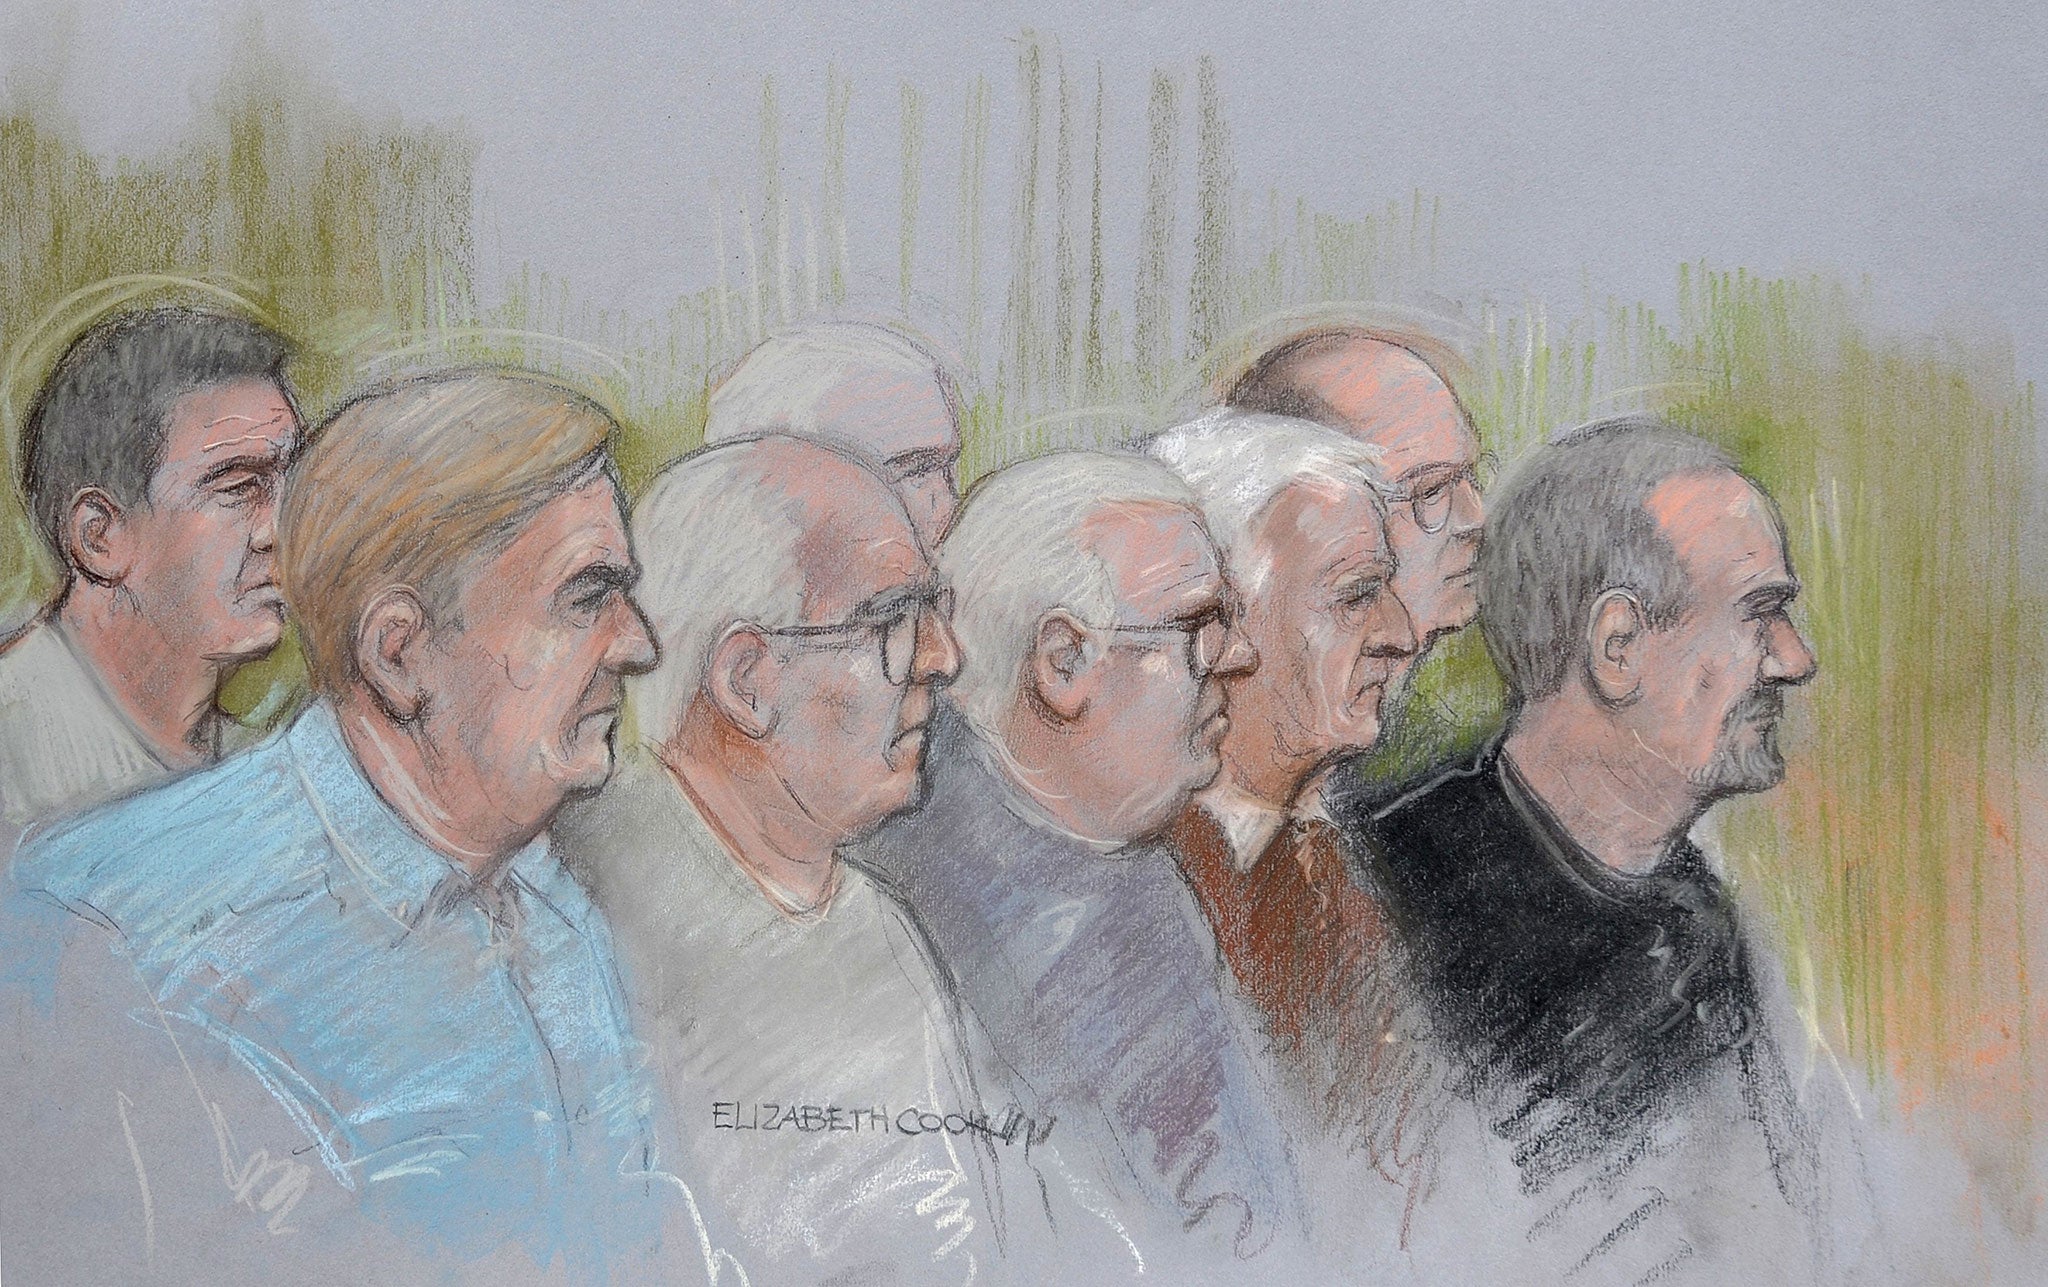 Court artist sketch by Elizabeth Cook of (front row left to right) Paul Reeder, William Lincoln, John Collins, Brian Reeder and Hugh Doyle, (back row left to right) Daniel Jones, Terry Perkins (obscured) and Carl Wood